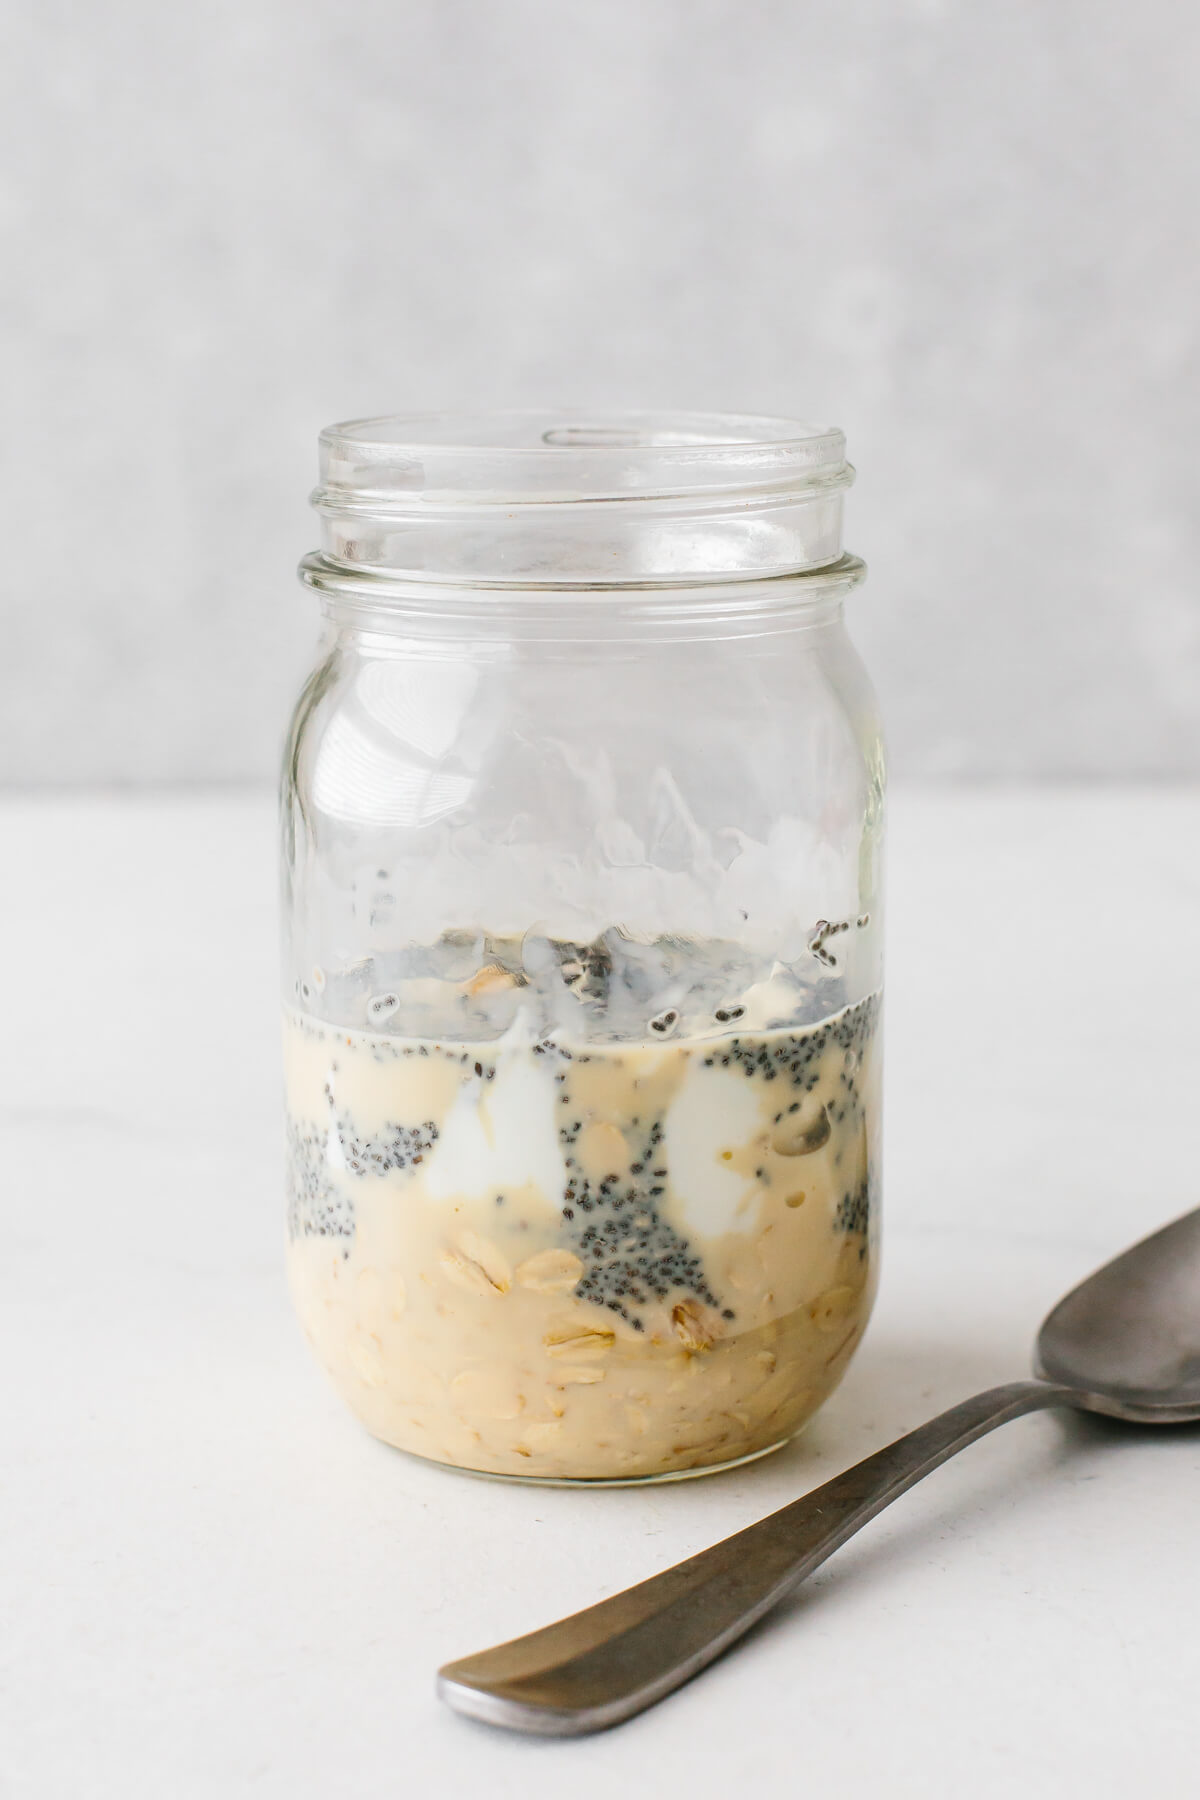 Mixing overnight oats in a jar.